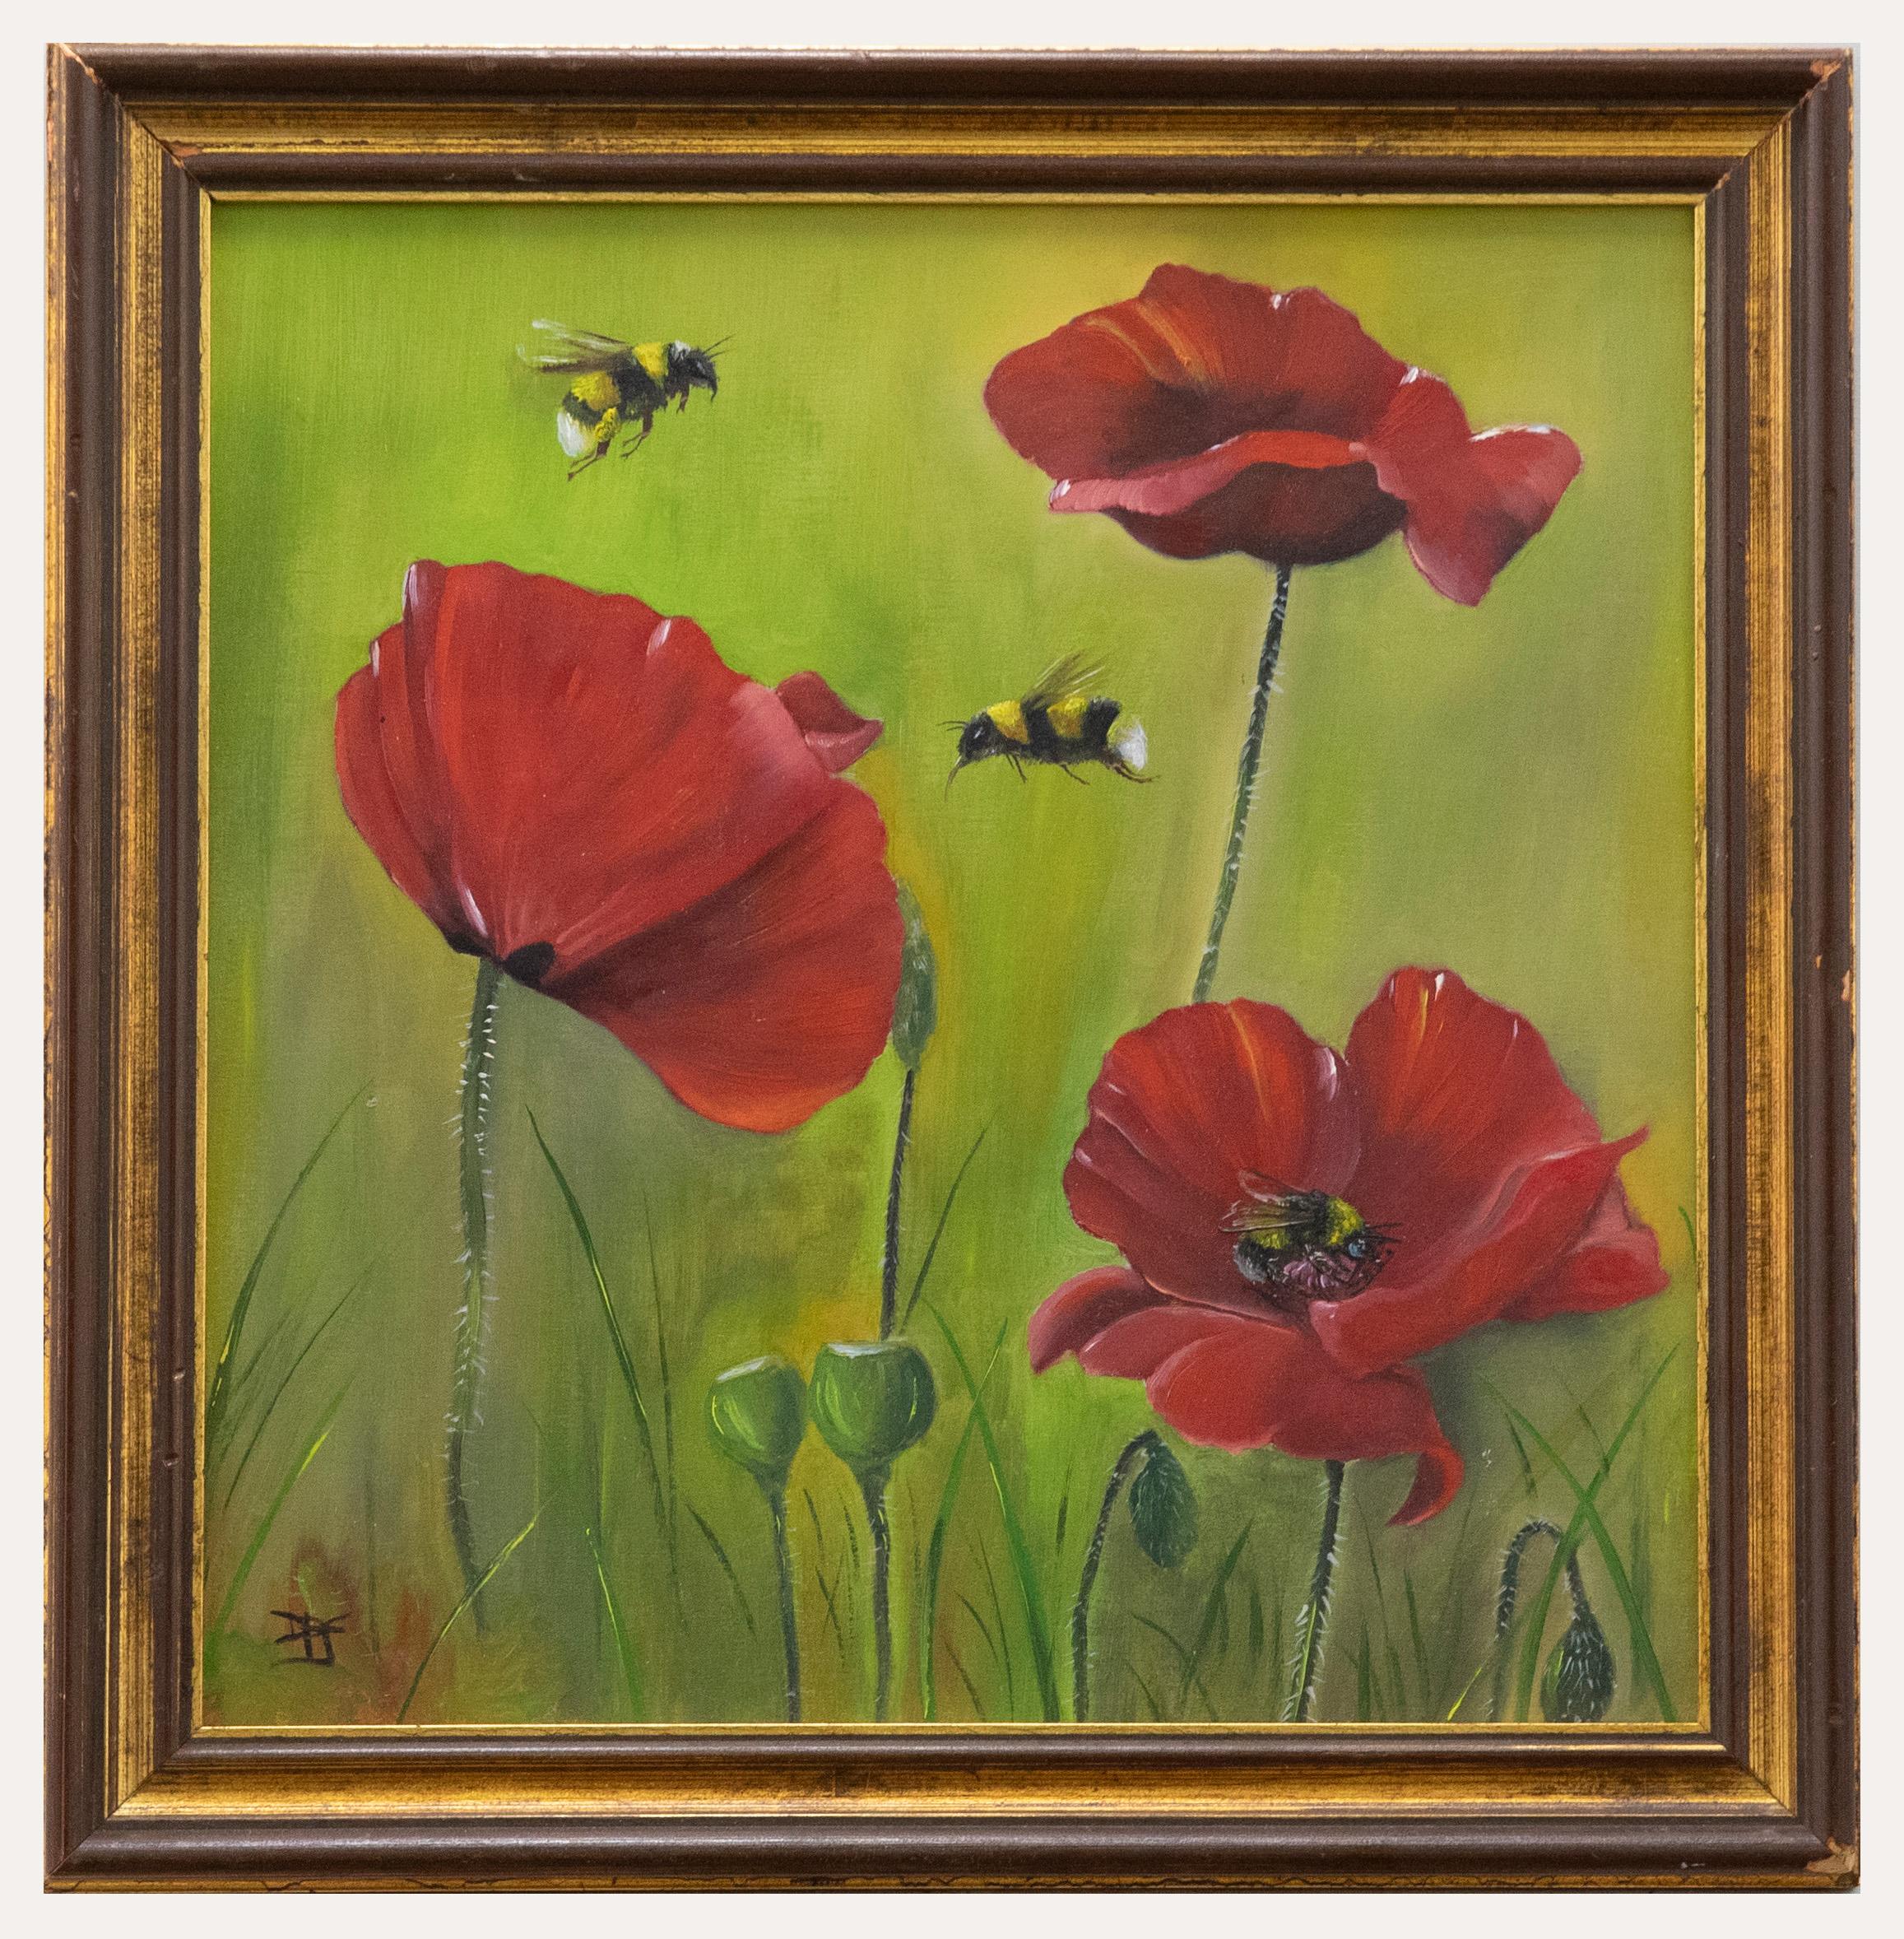 Unknown Still-Life Painting - Vivek Mandalia - Framed Contemporary Oil, Bumble Bee's & Poppies